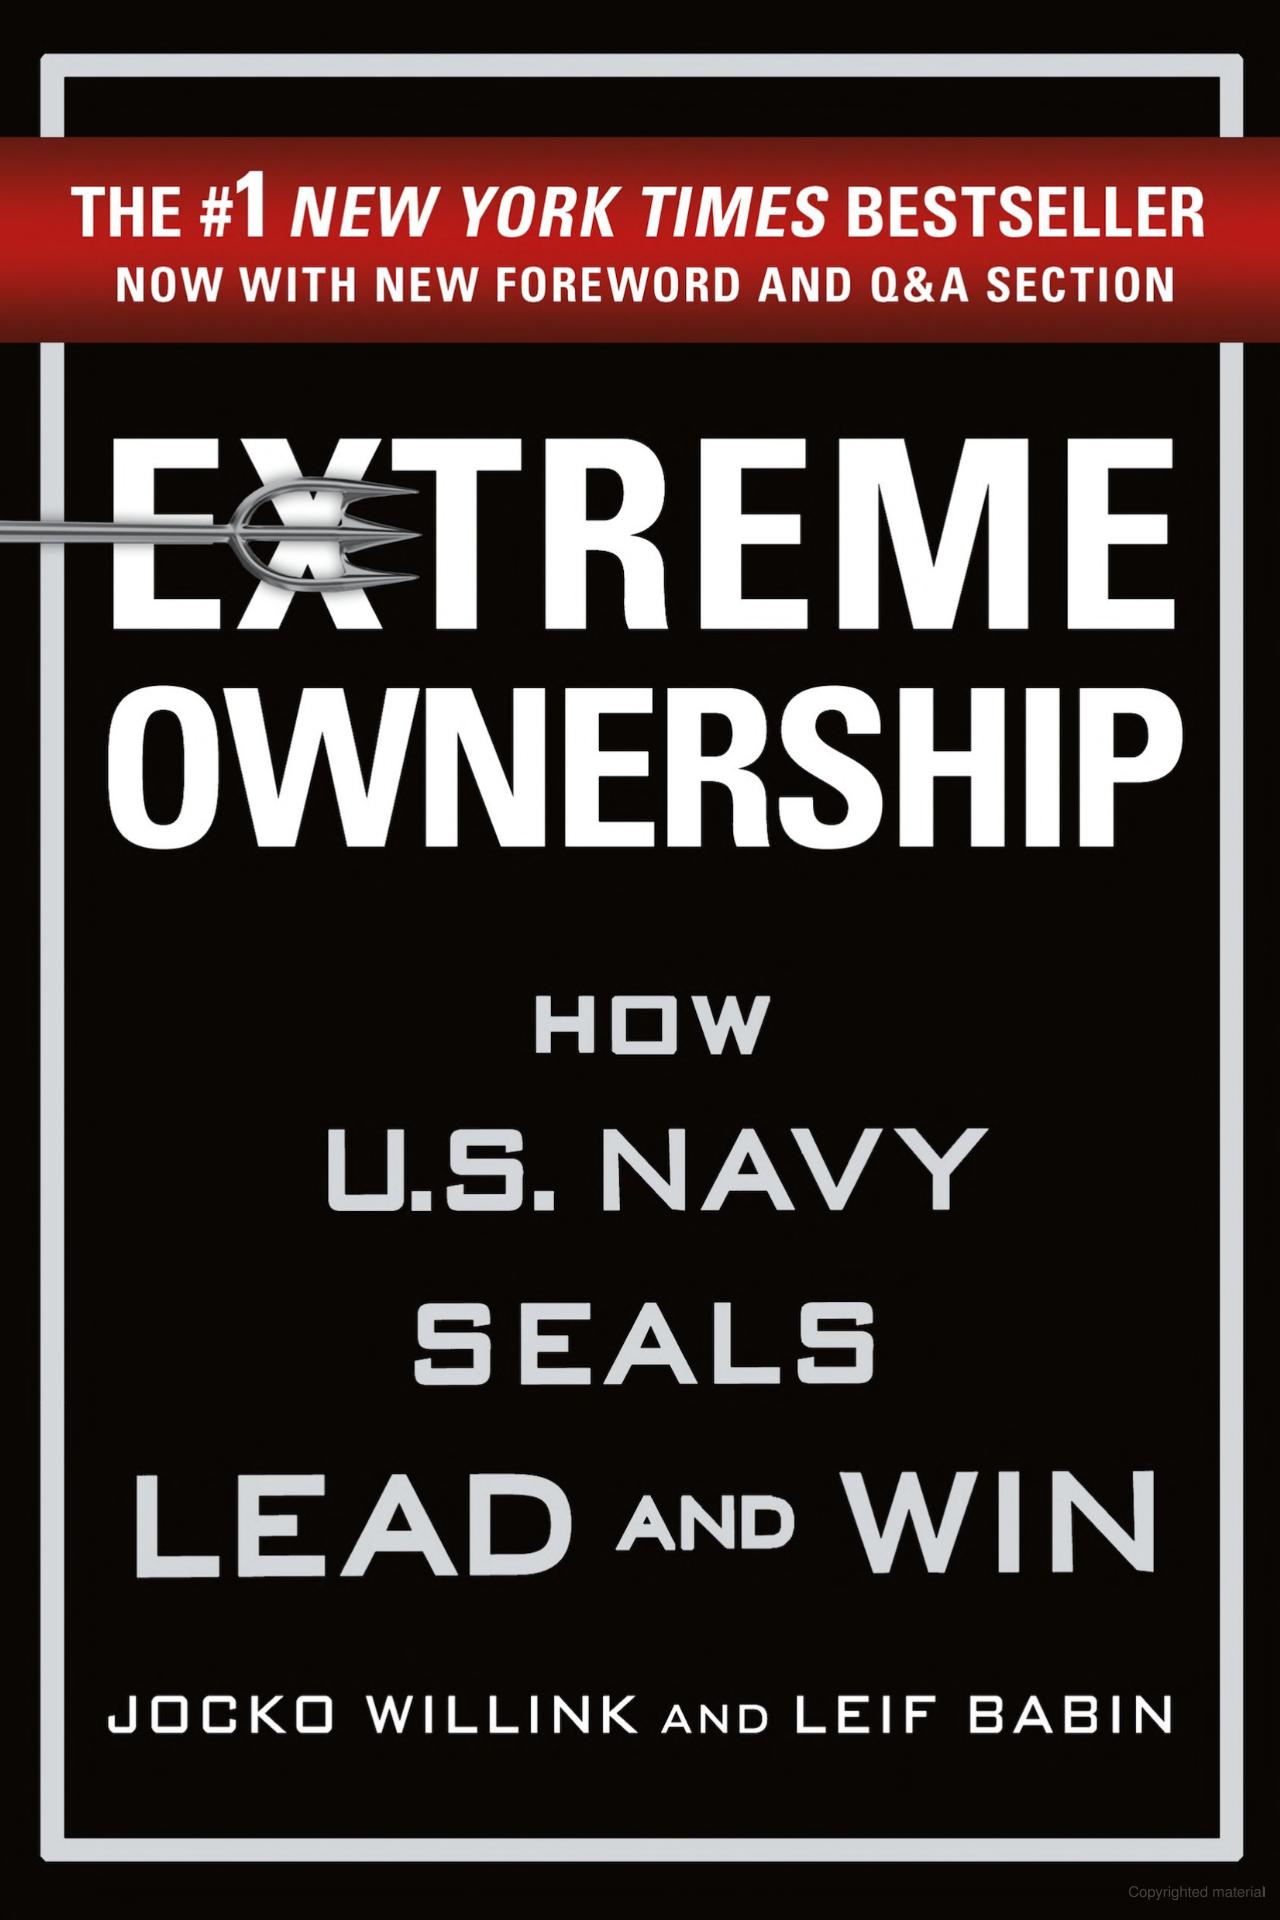 Bedside table: 2 former navy SEALs teach how to lead in 'Extreme Ownership'